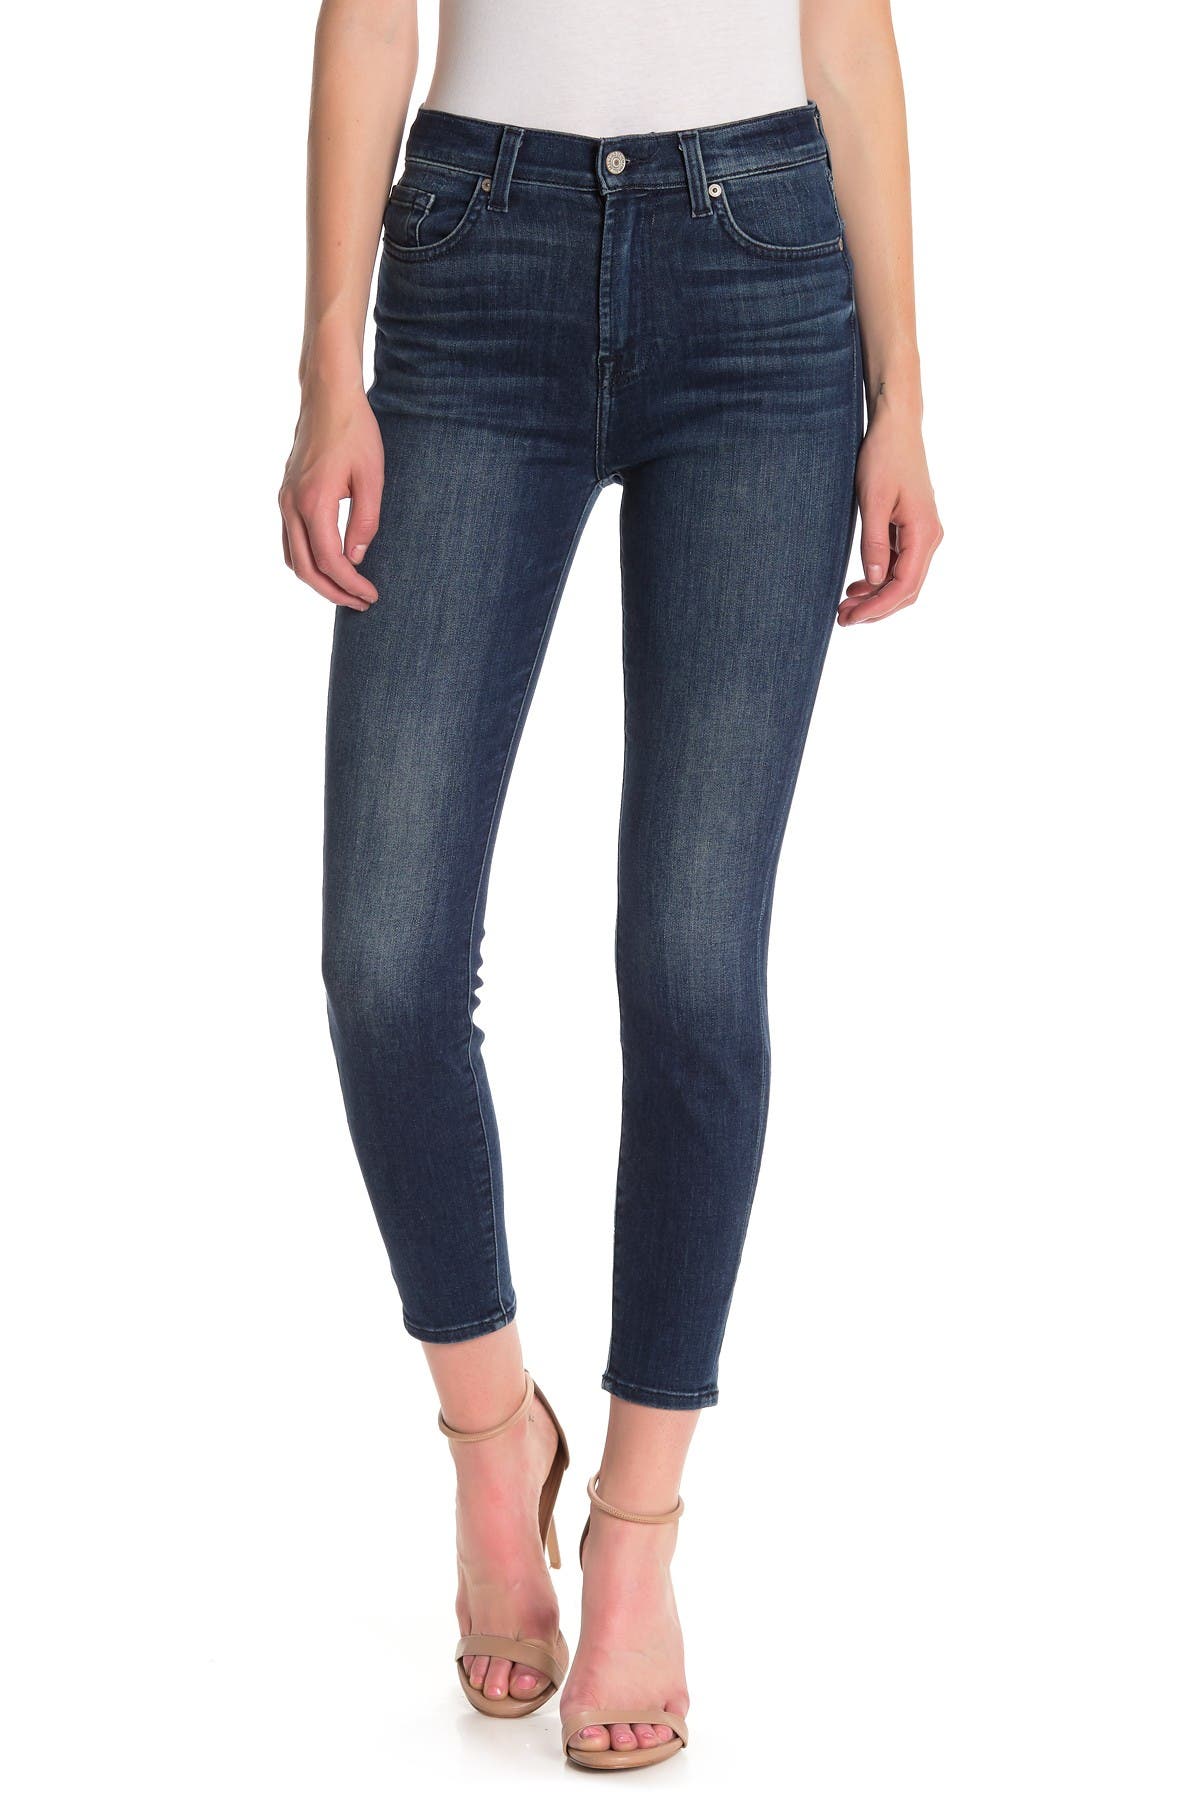 7 for all mankind high rise skinny jeans